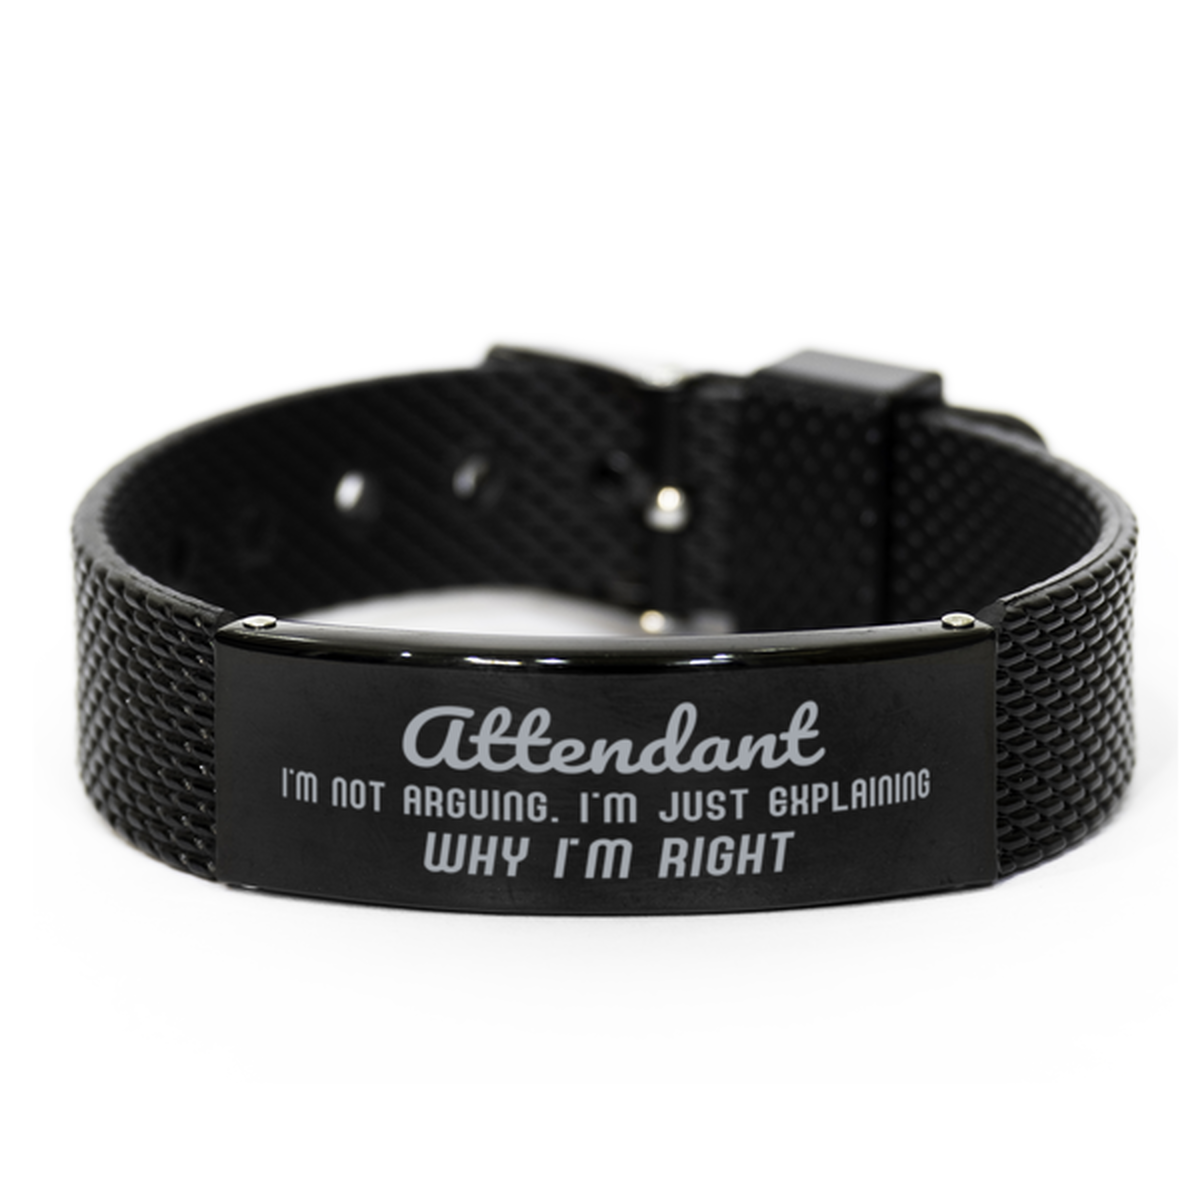 Attendant I'm not Arguing. I'm Just Explaining Why I'm RIGHT Black Shark Mesh Bracelet, Funny Saying Quote Attendant Gifts For Attendant Graduation Birthday Christmas Gifts for Men Women Coworker